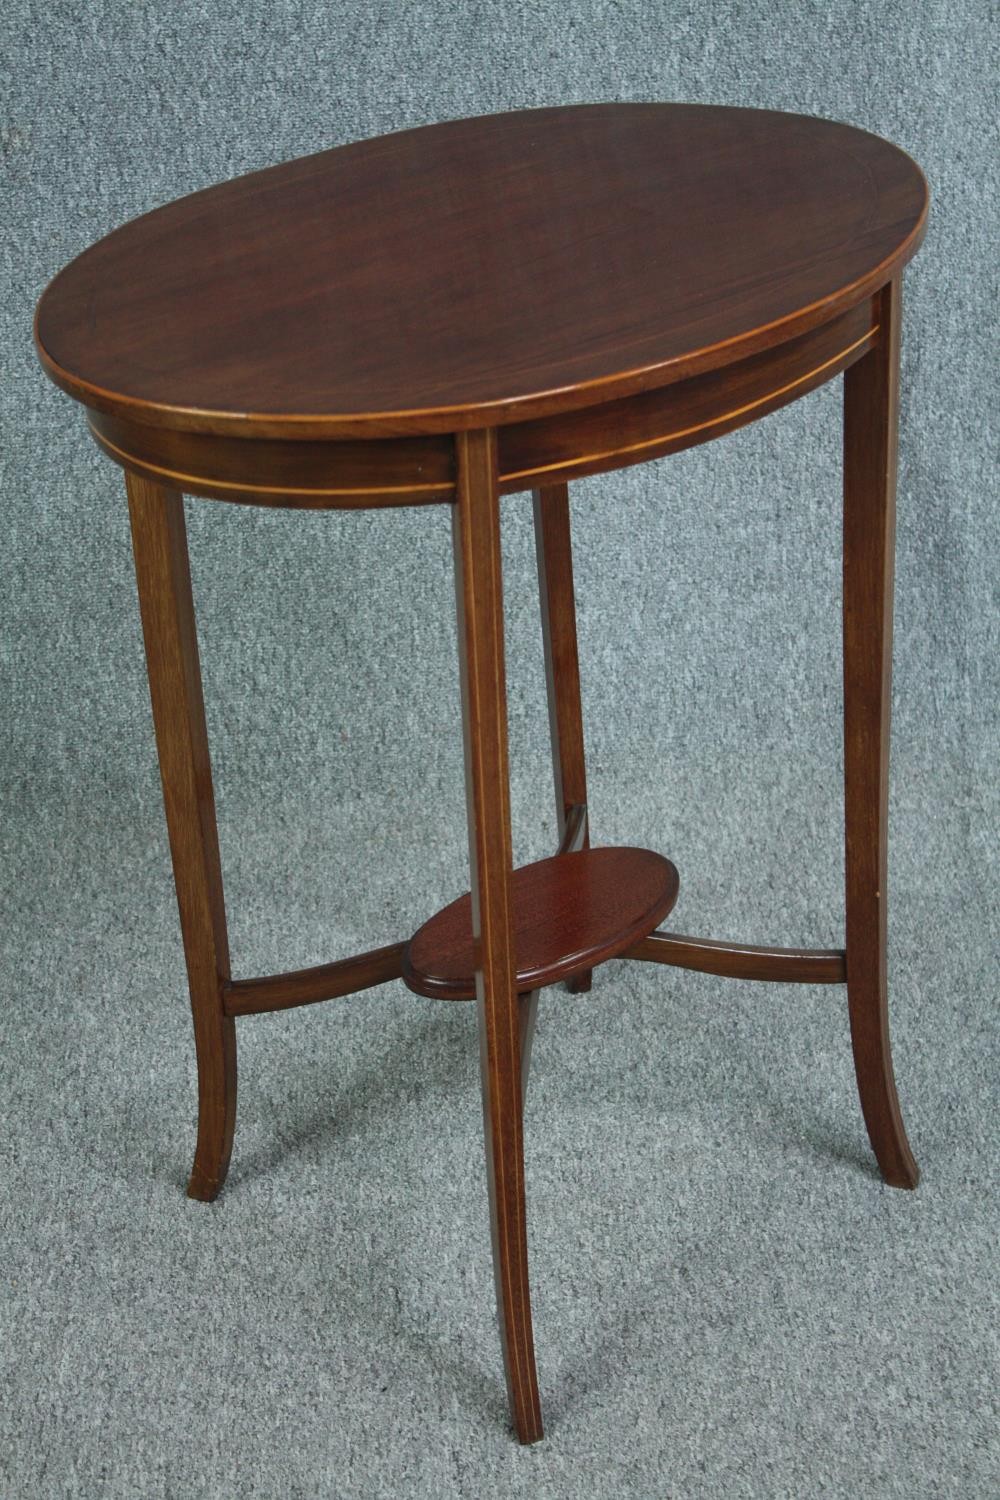 Occasional table, Edwardian mahogany with satinwood inlay. H.73 W.60 D.43cm. - Image 3 of 5